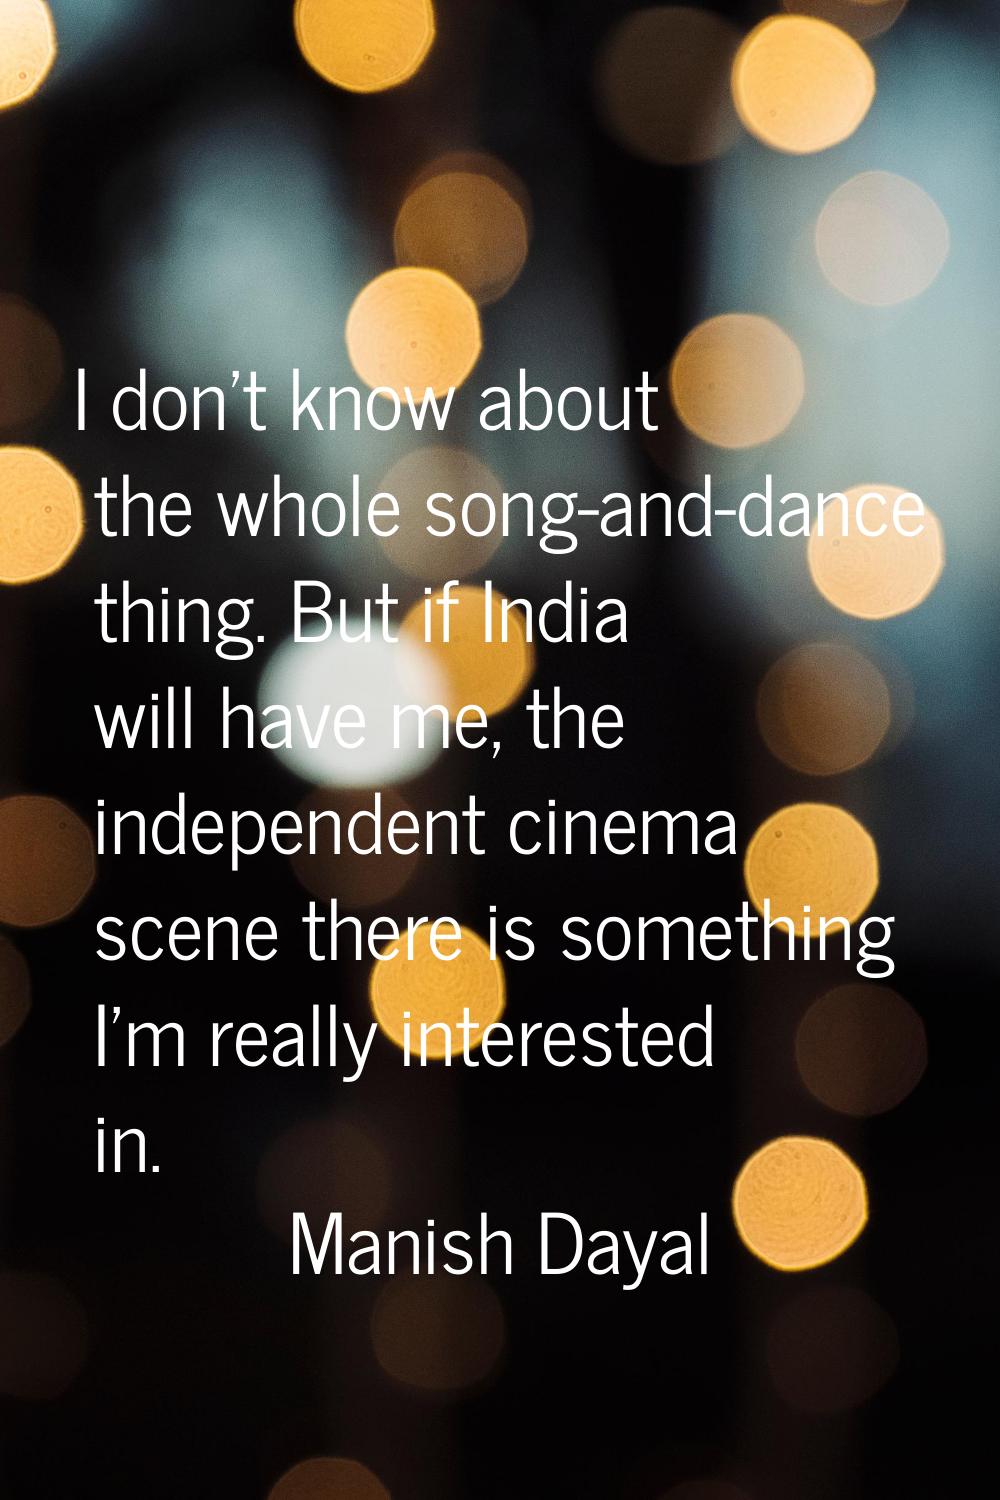 I don't know about the whole song-and-dance thing. But if India will have me, the independent cinem